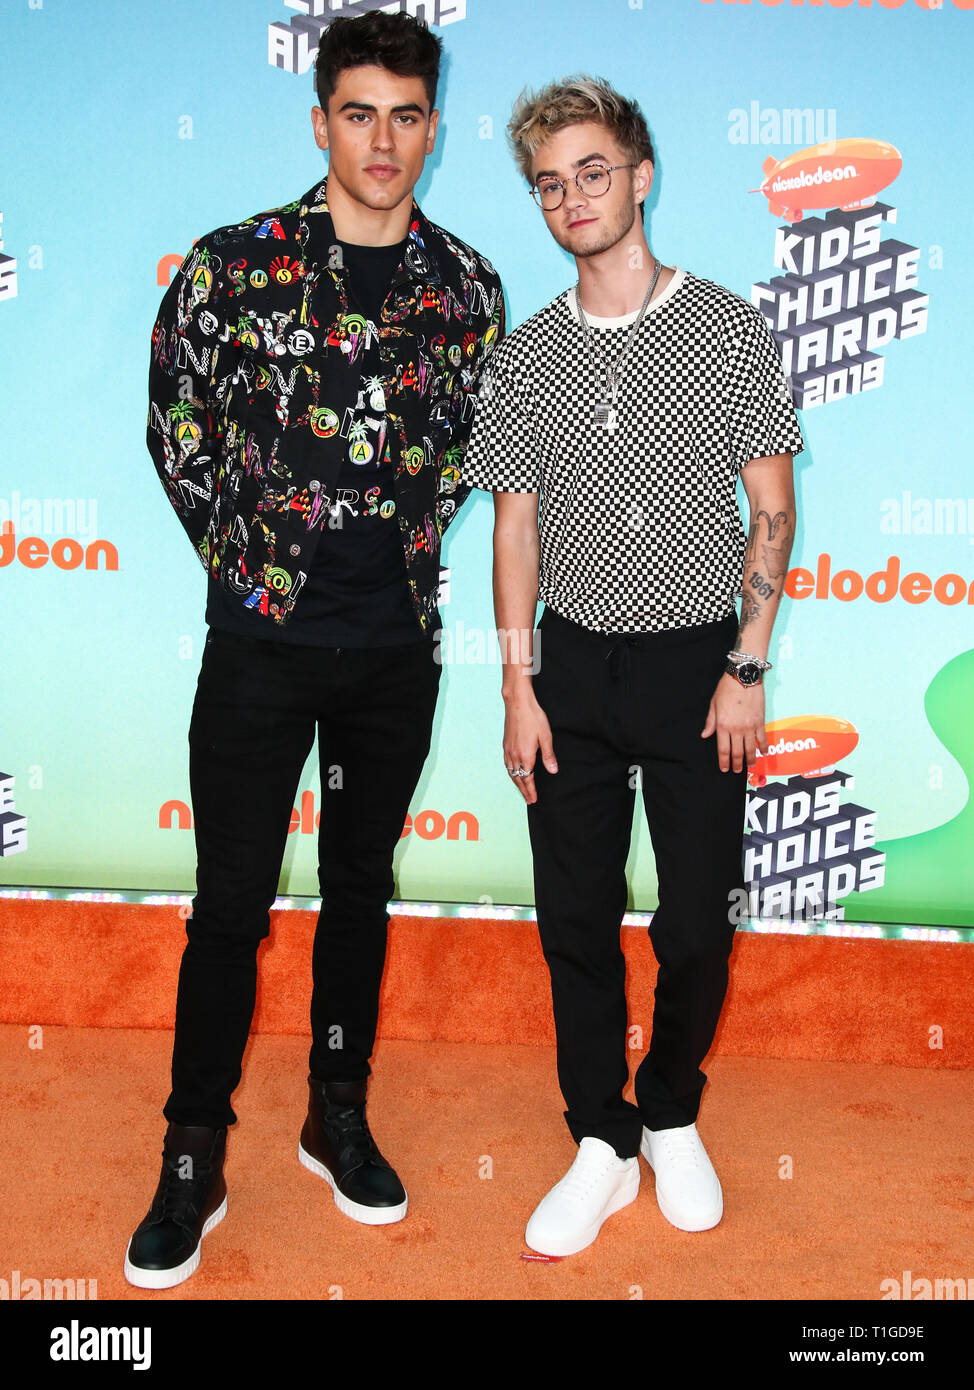 LOS ANGELES, CA, USA - MARCH 23: Jack Johnson and Jack Gilinsky of ...